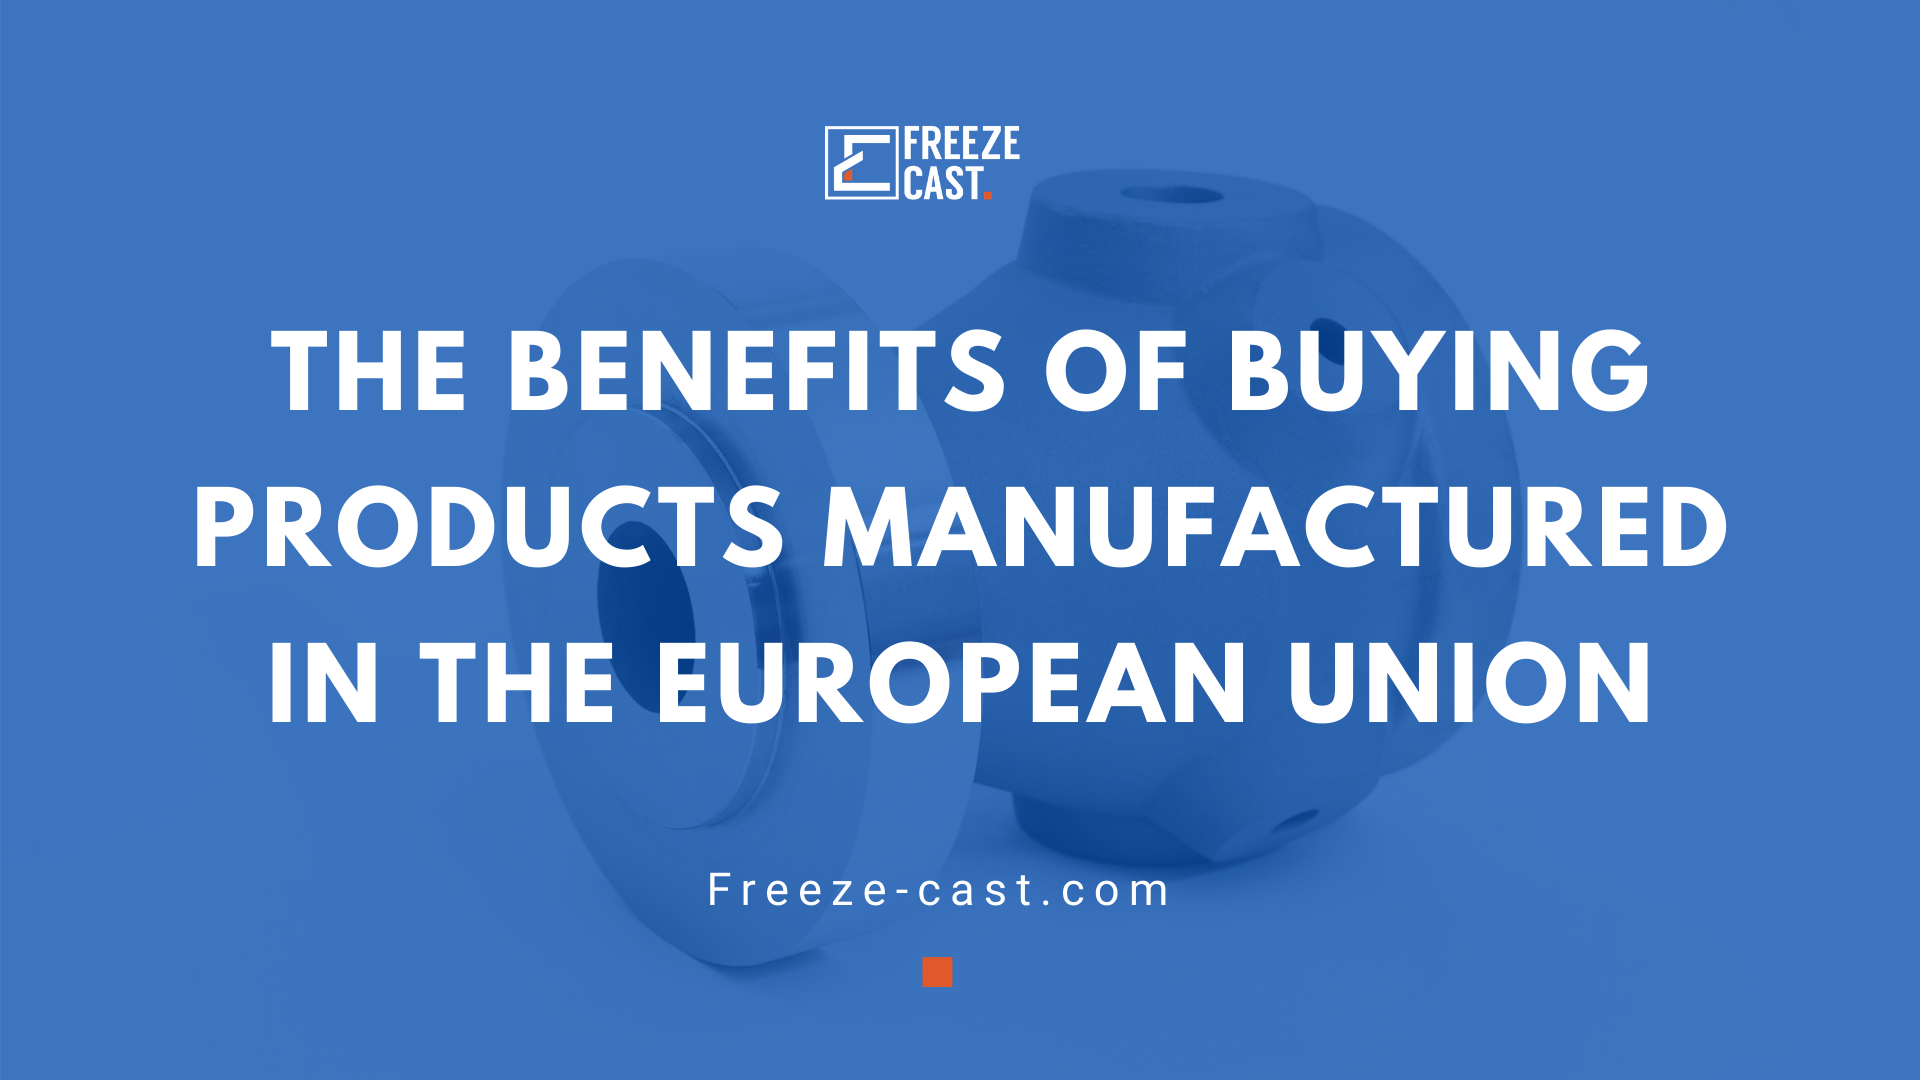 The benefits of buying products manufactured in the European Union